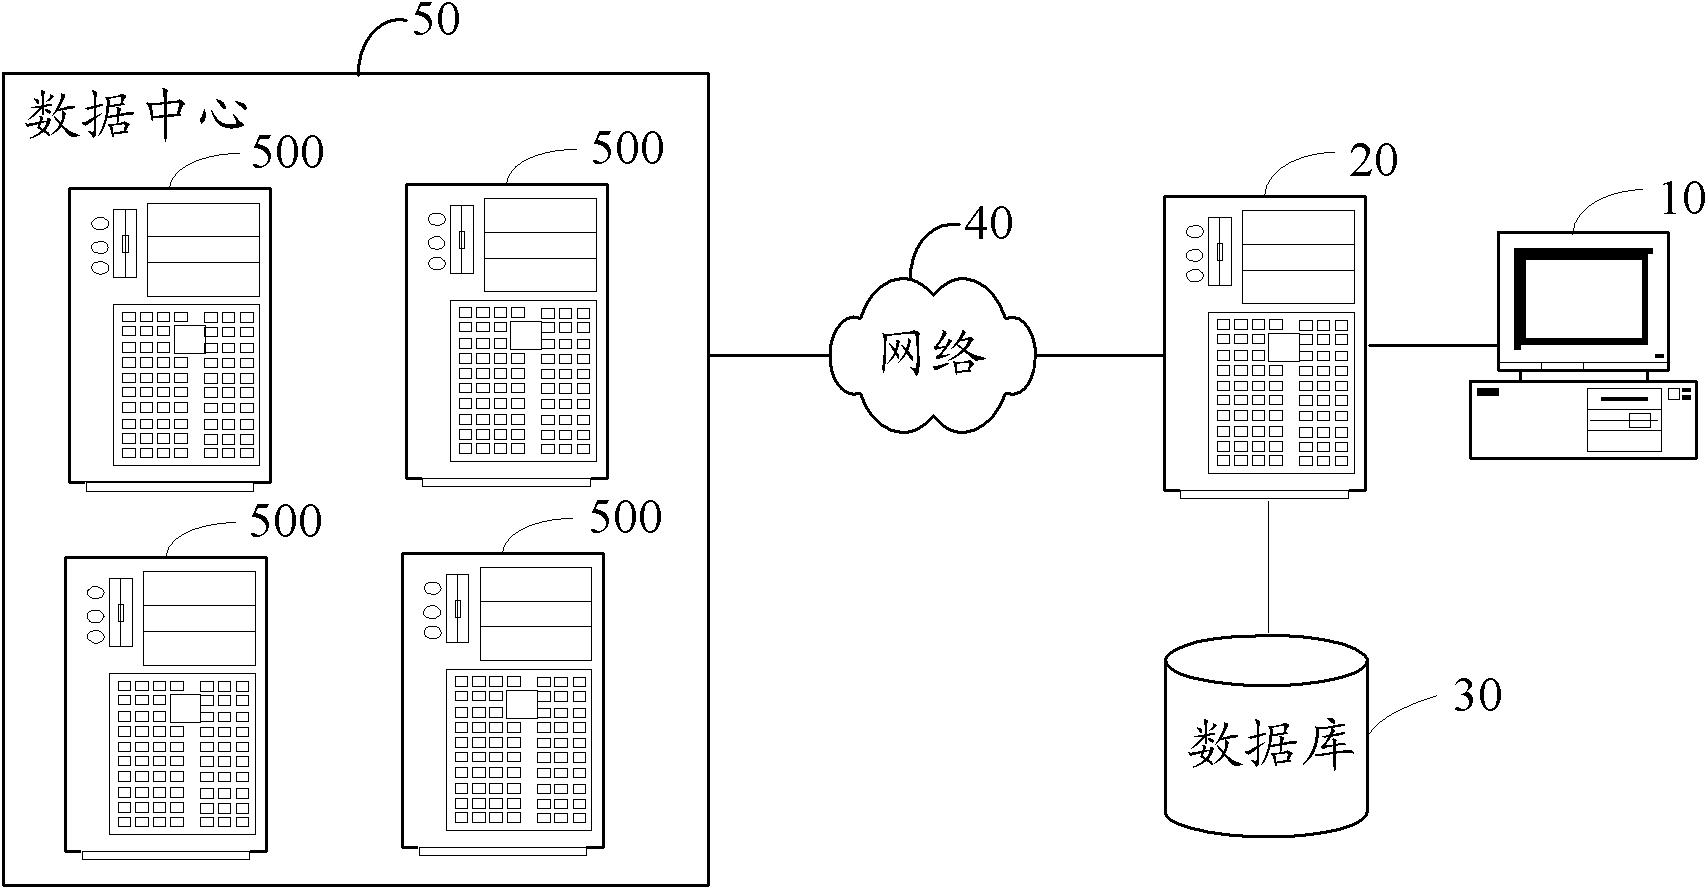 Virtual machine mounting system and method